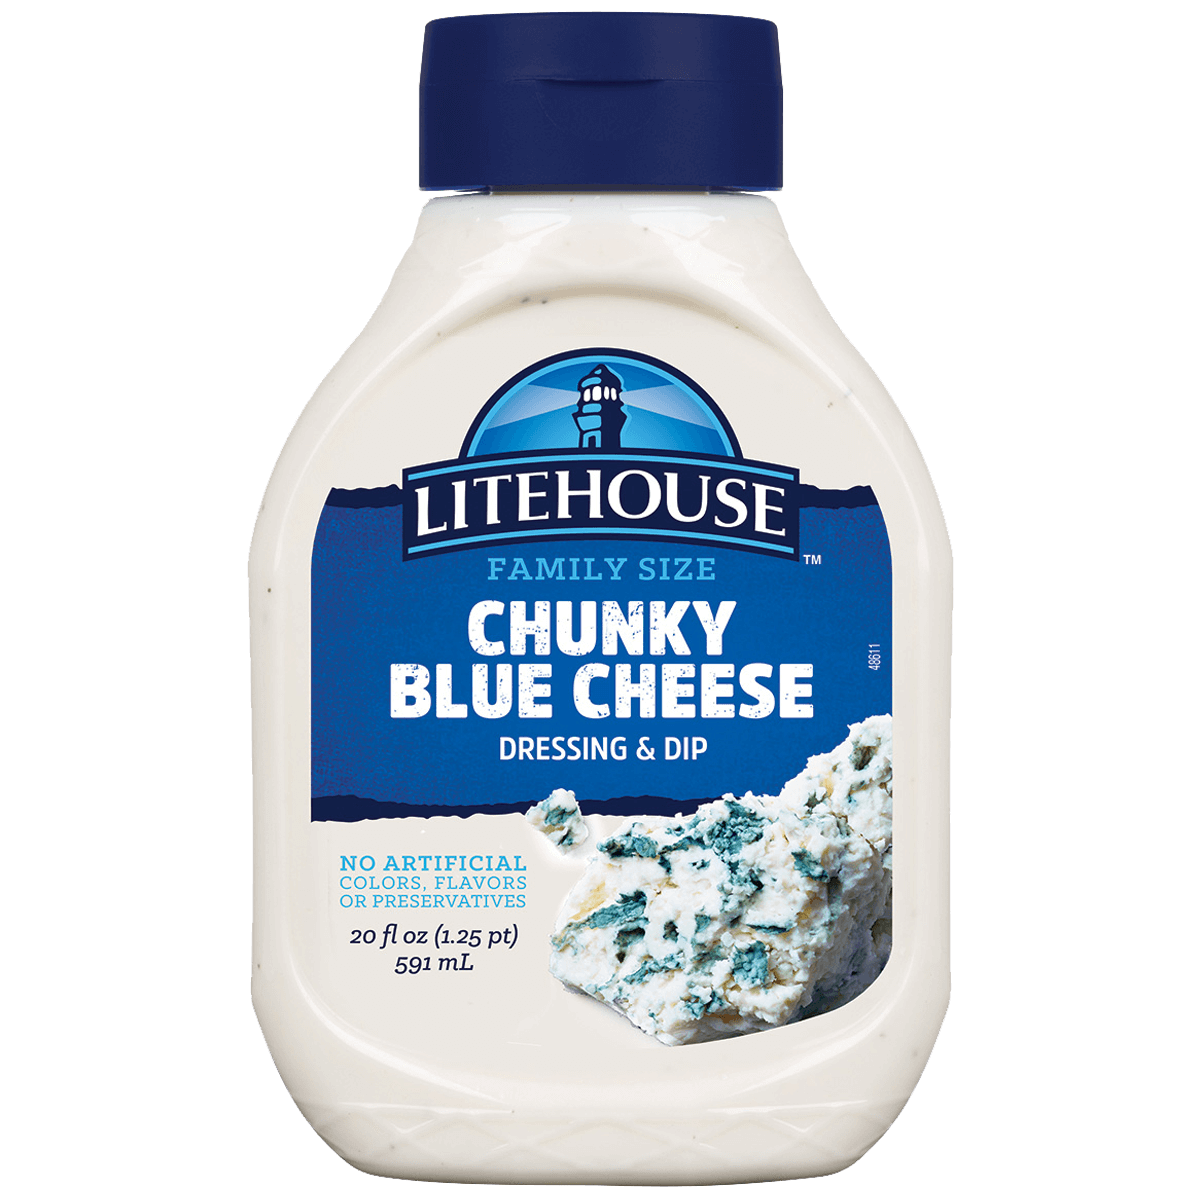 LITEHOUSE CHUNKY BLUE CHEESE